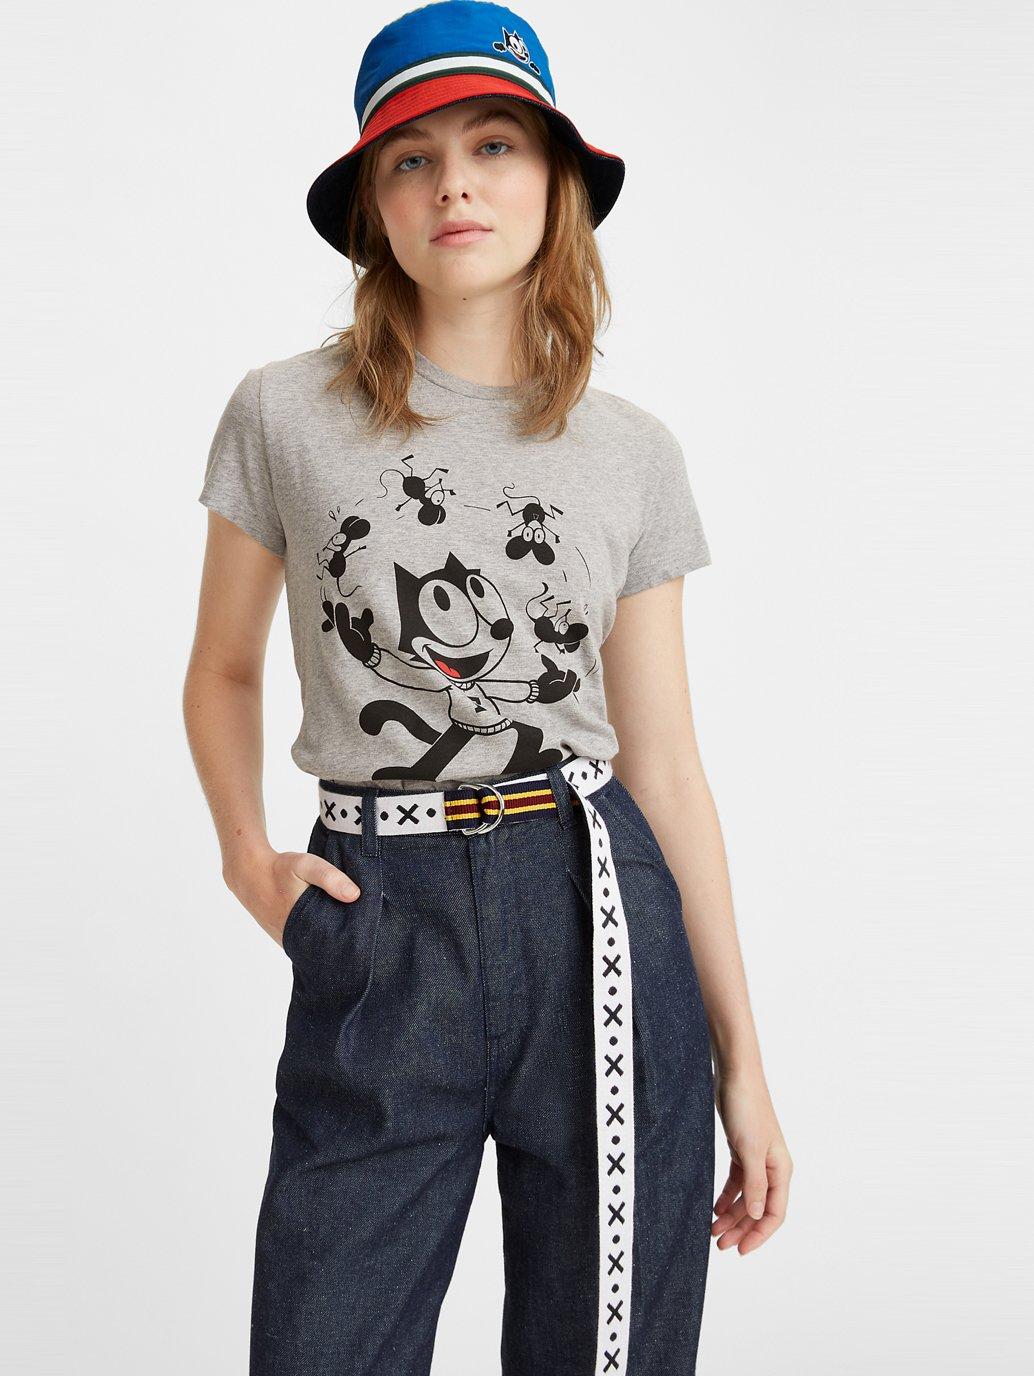 levis malaysia x felix the cat womens relaxed t shirt A12340000 10 Model Front